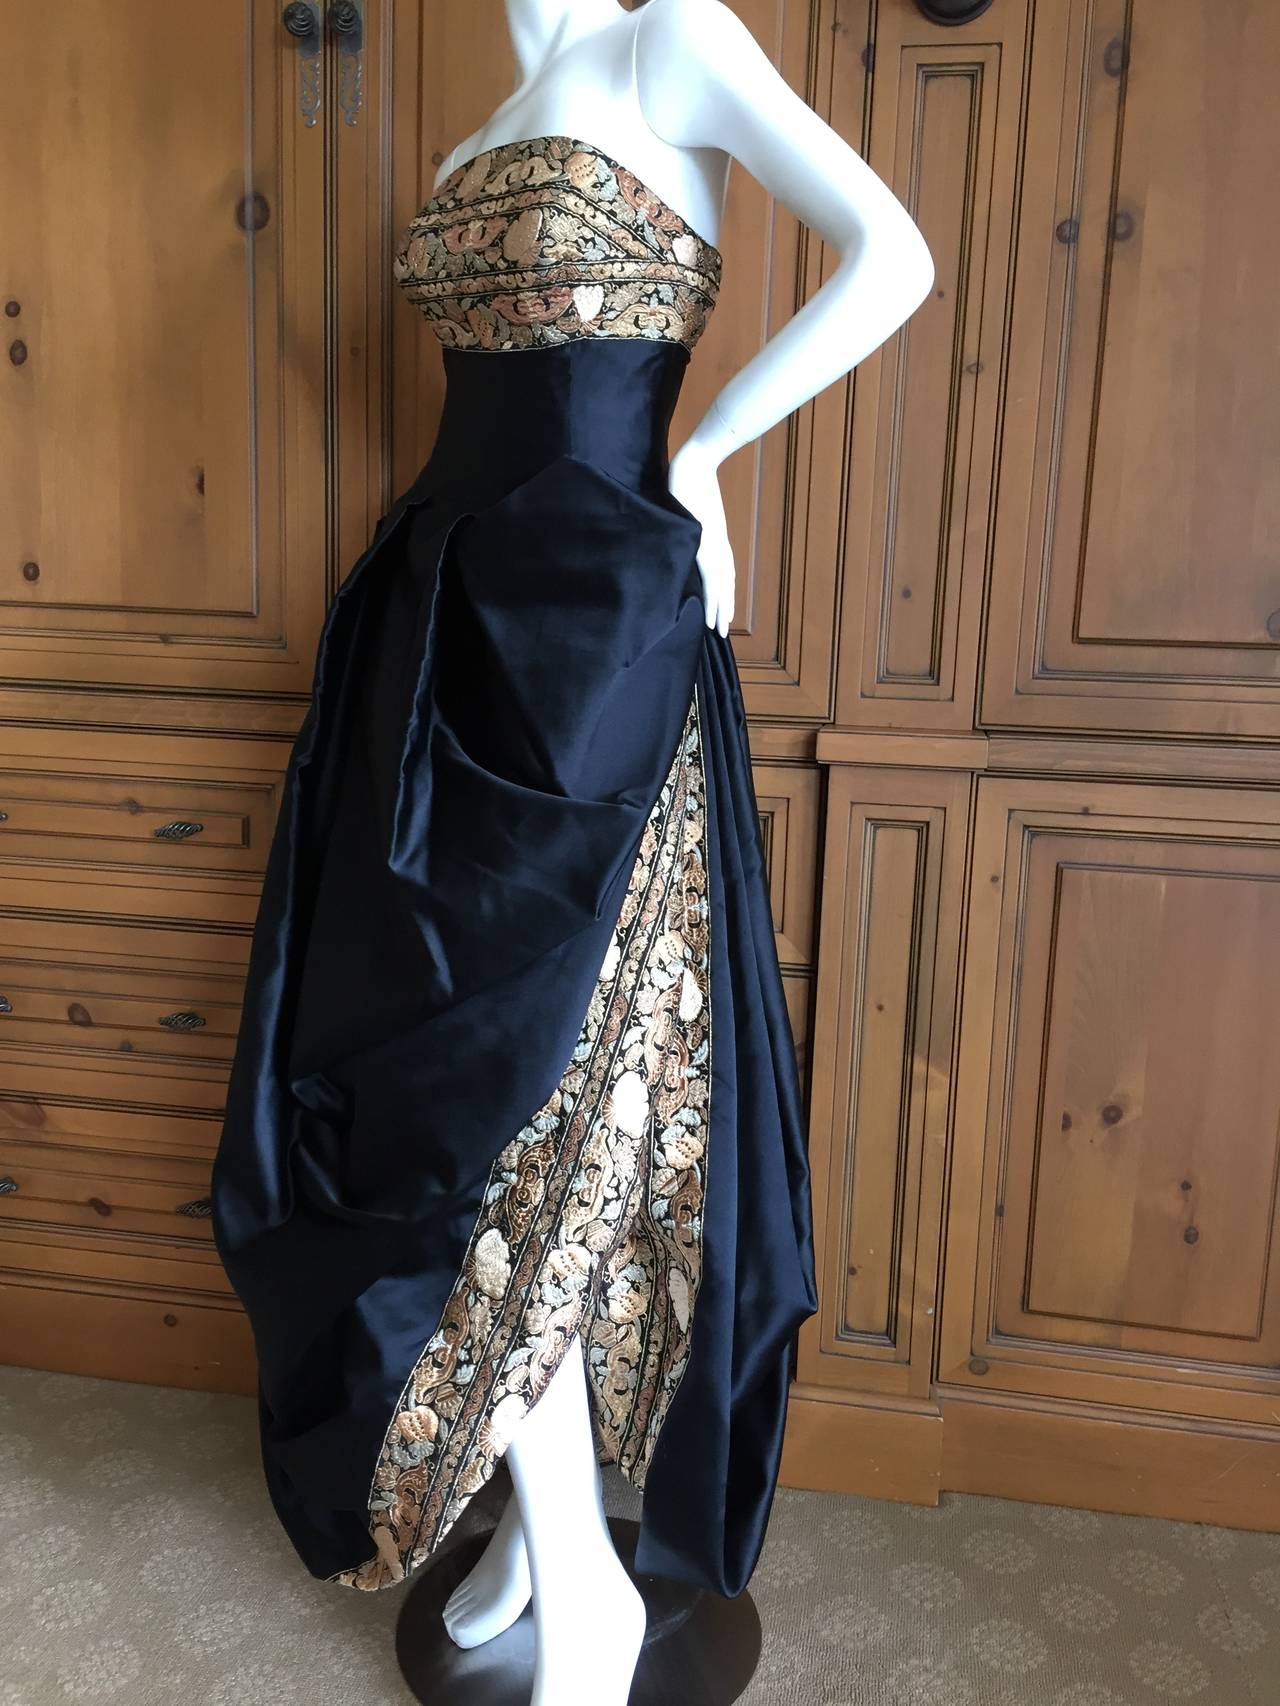 Exquisite Paul-Louis Orrier Paris Black Strapless Gown with Gold Brocade Accents and a Matching Shawl.
So seductive,  with a high slit on the skirt exposing the gold brocade.
This is quite small, I would estimate size 0-2 in todays sizing.